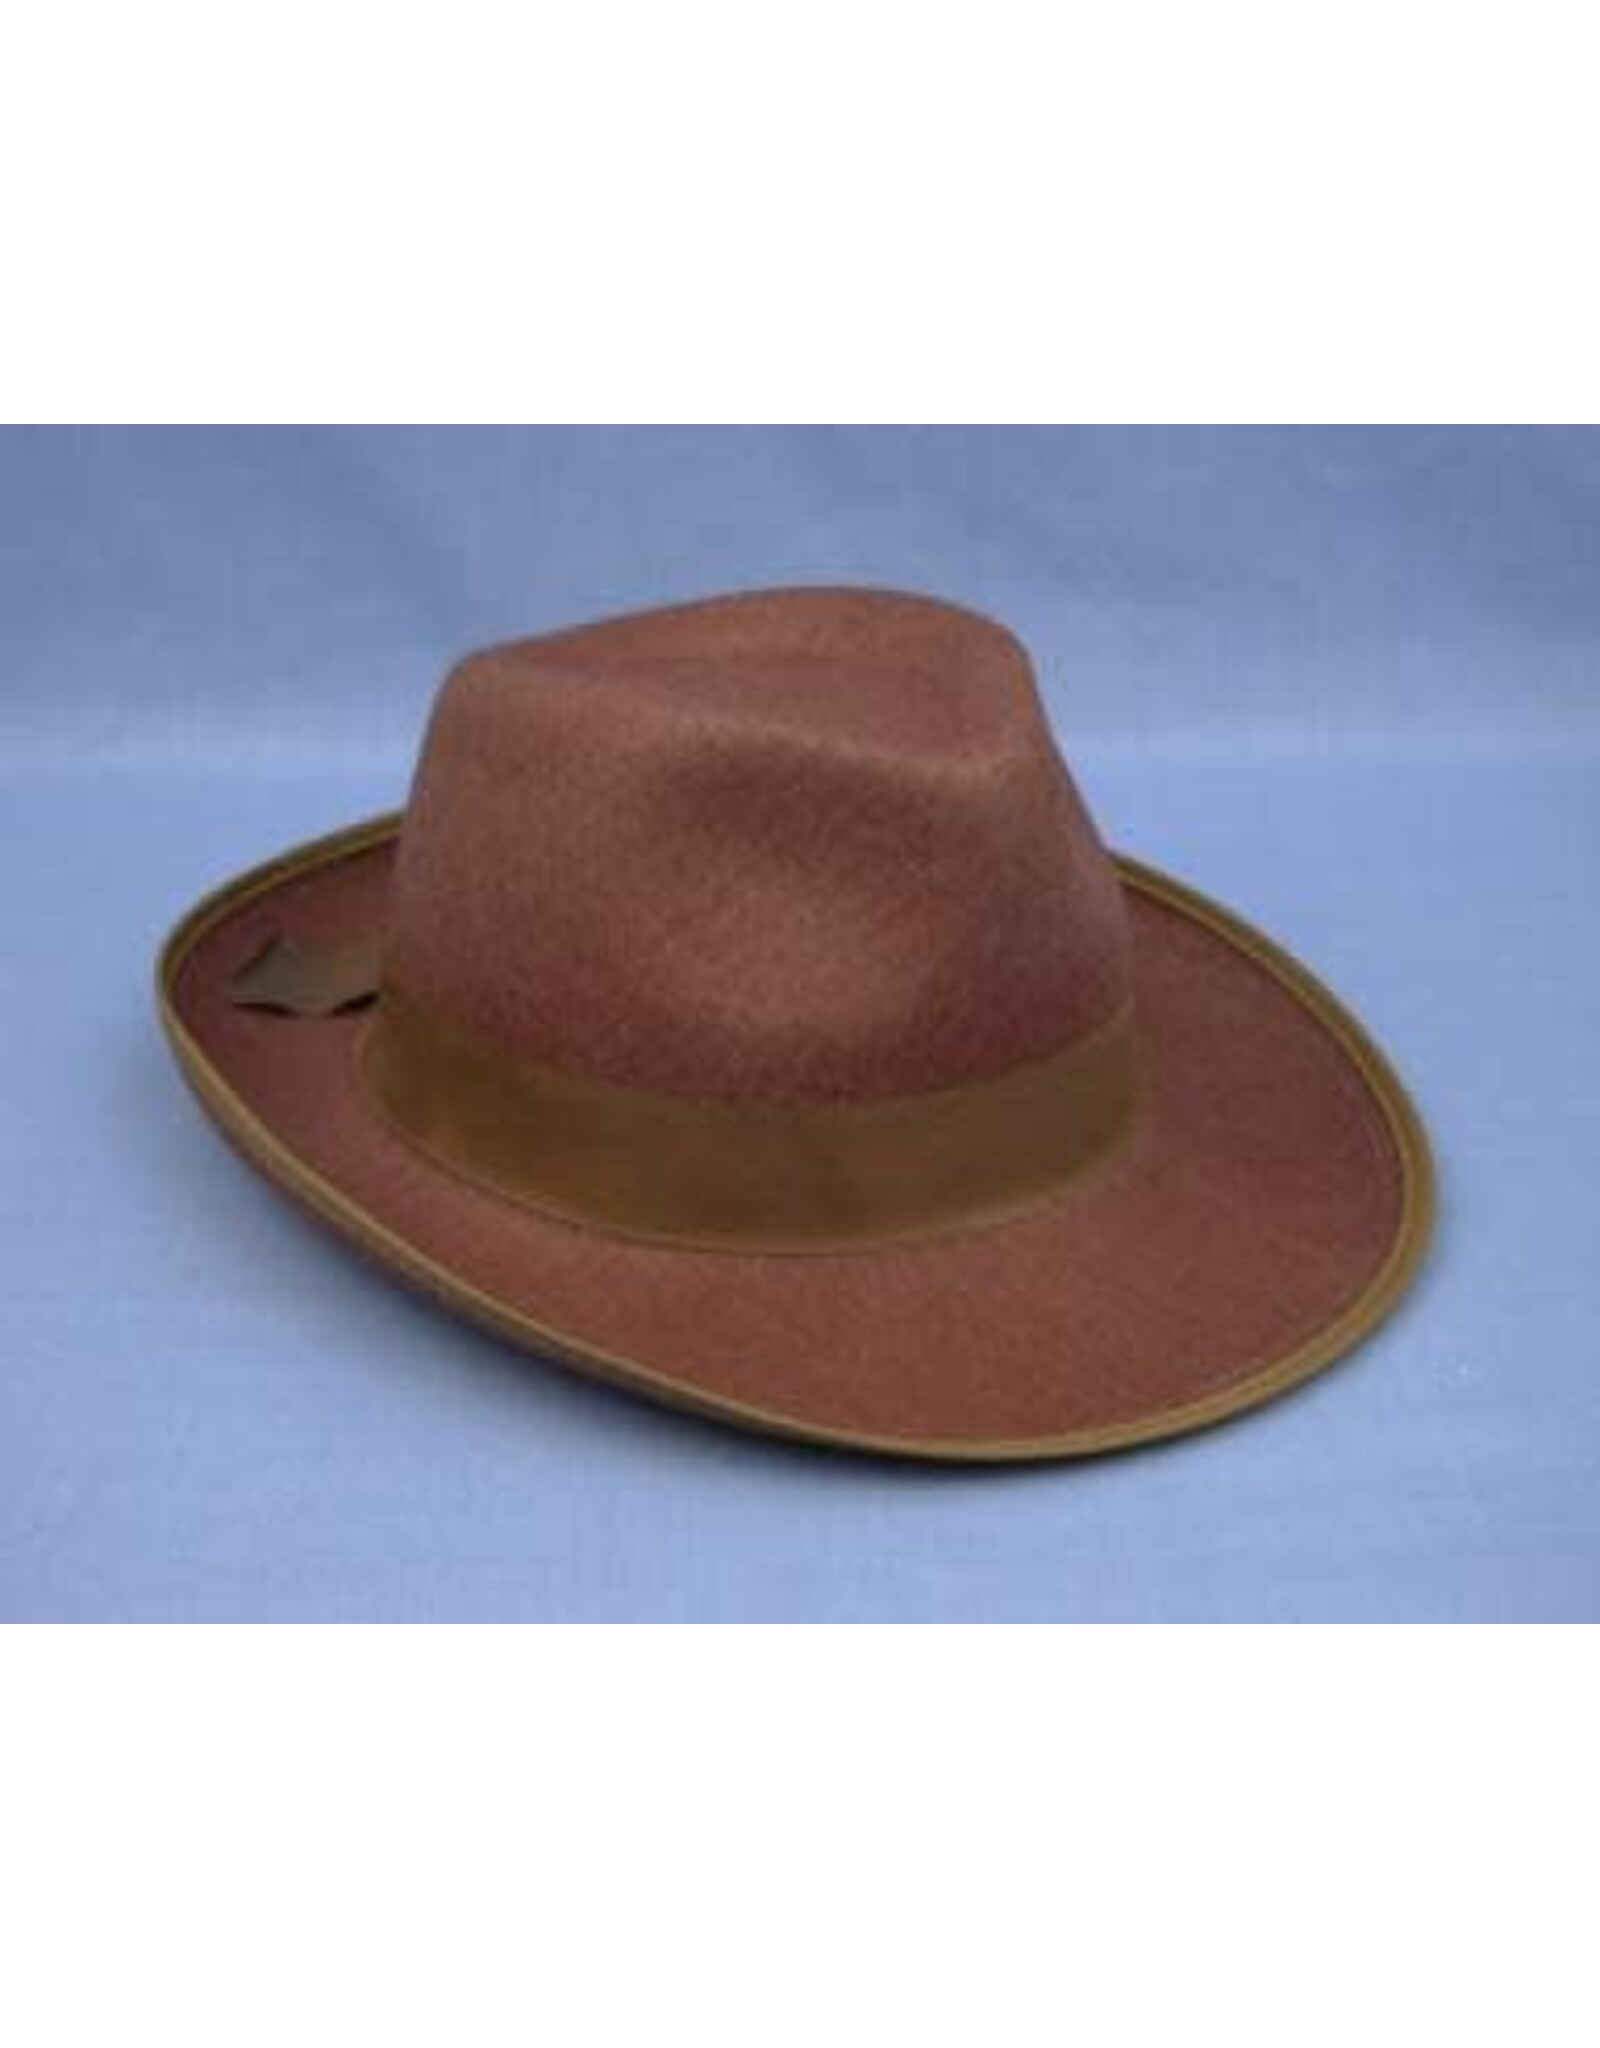 HM Smallwares Gangster Hat Deluxe Brown